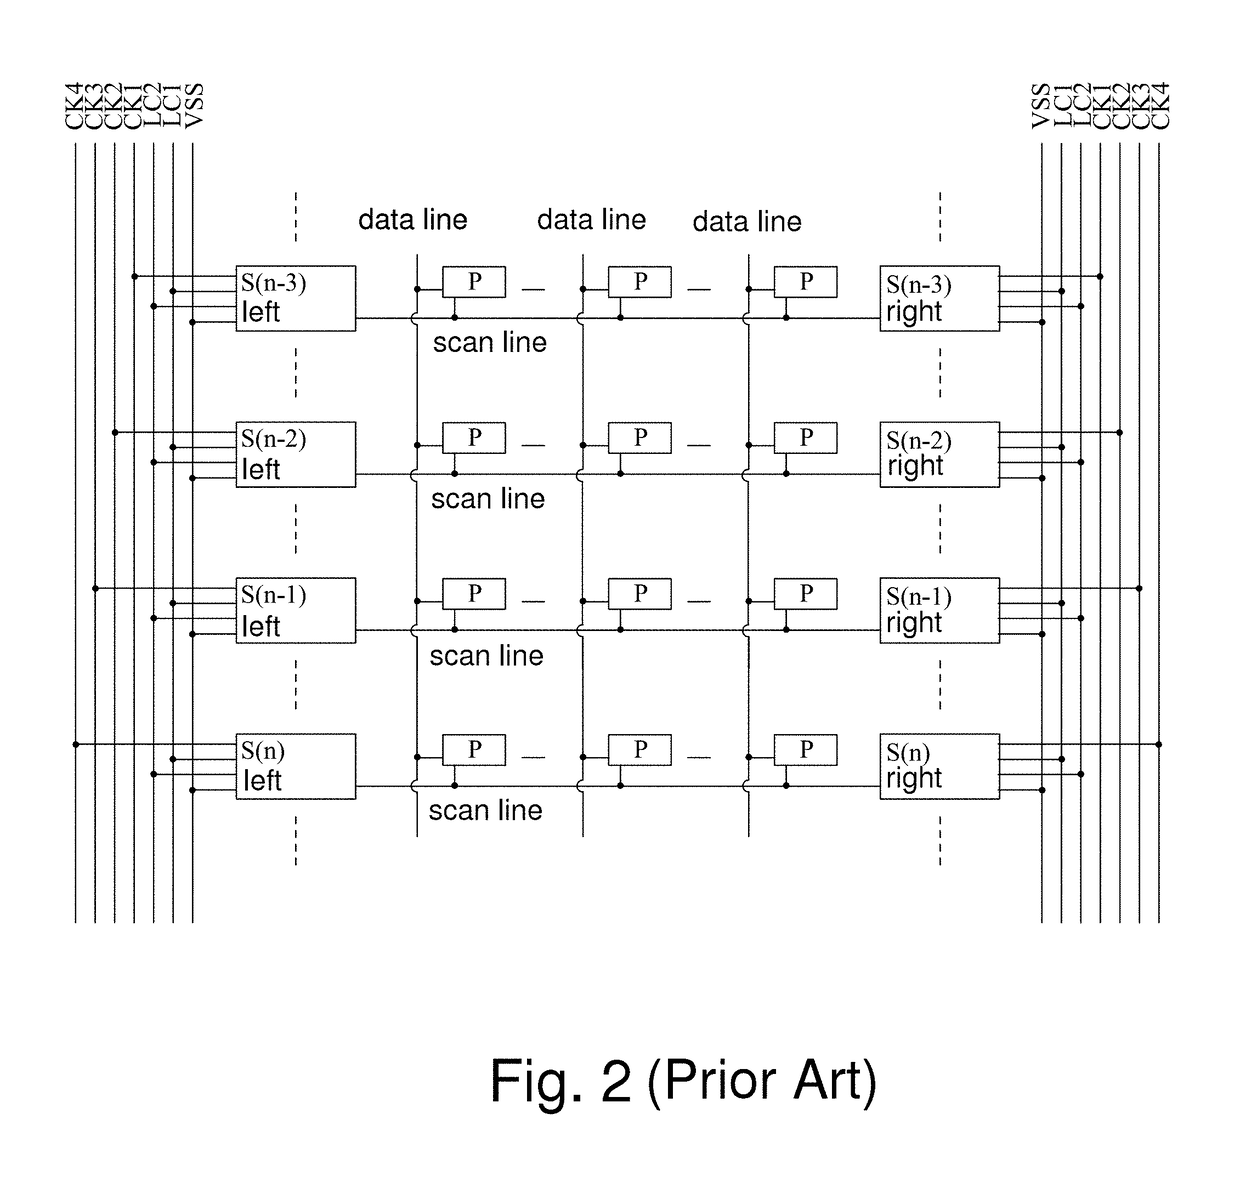 Complementary gate driver on array circuit employed for panel display